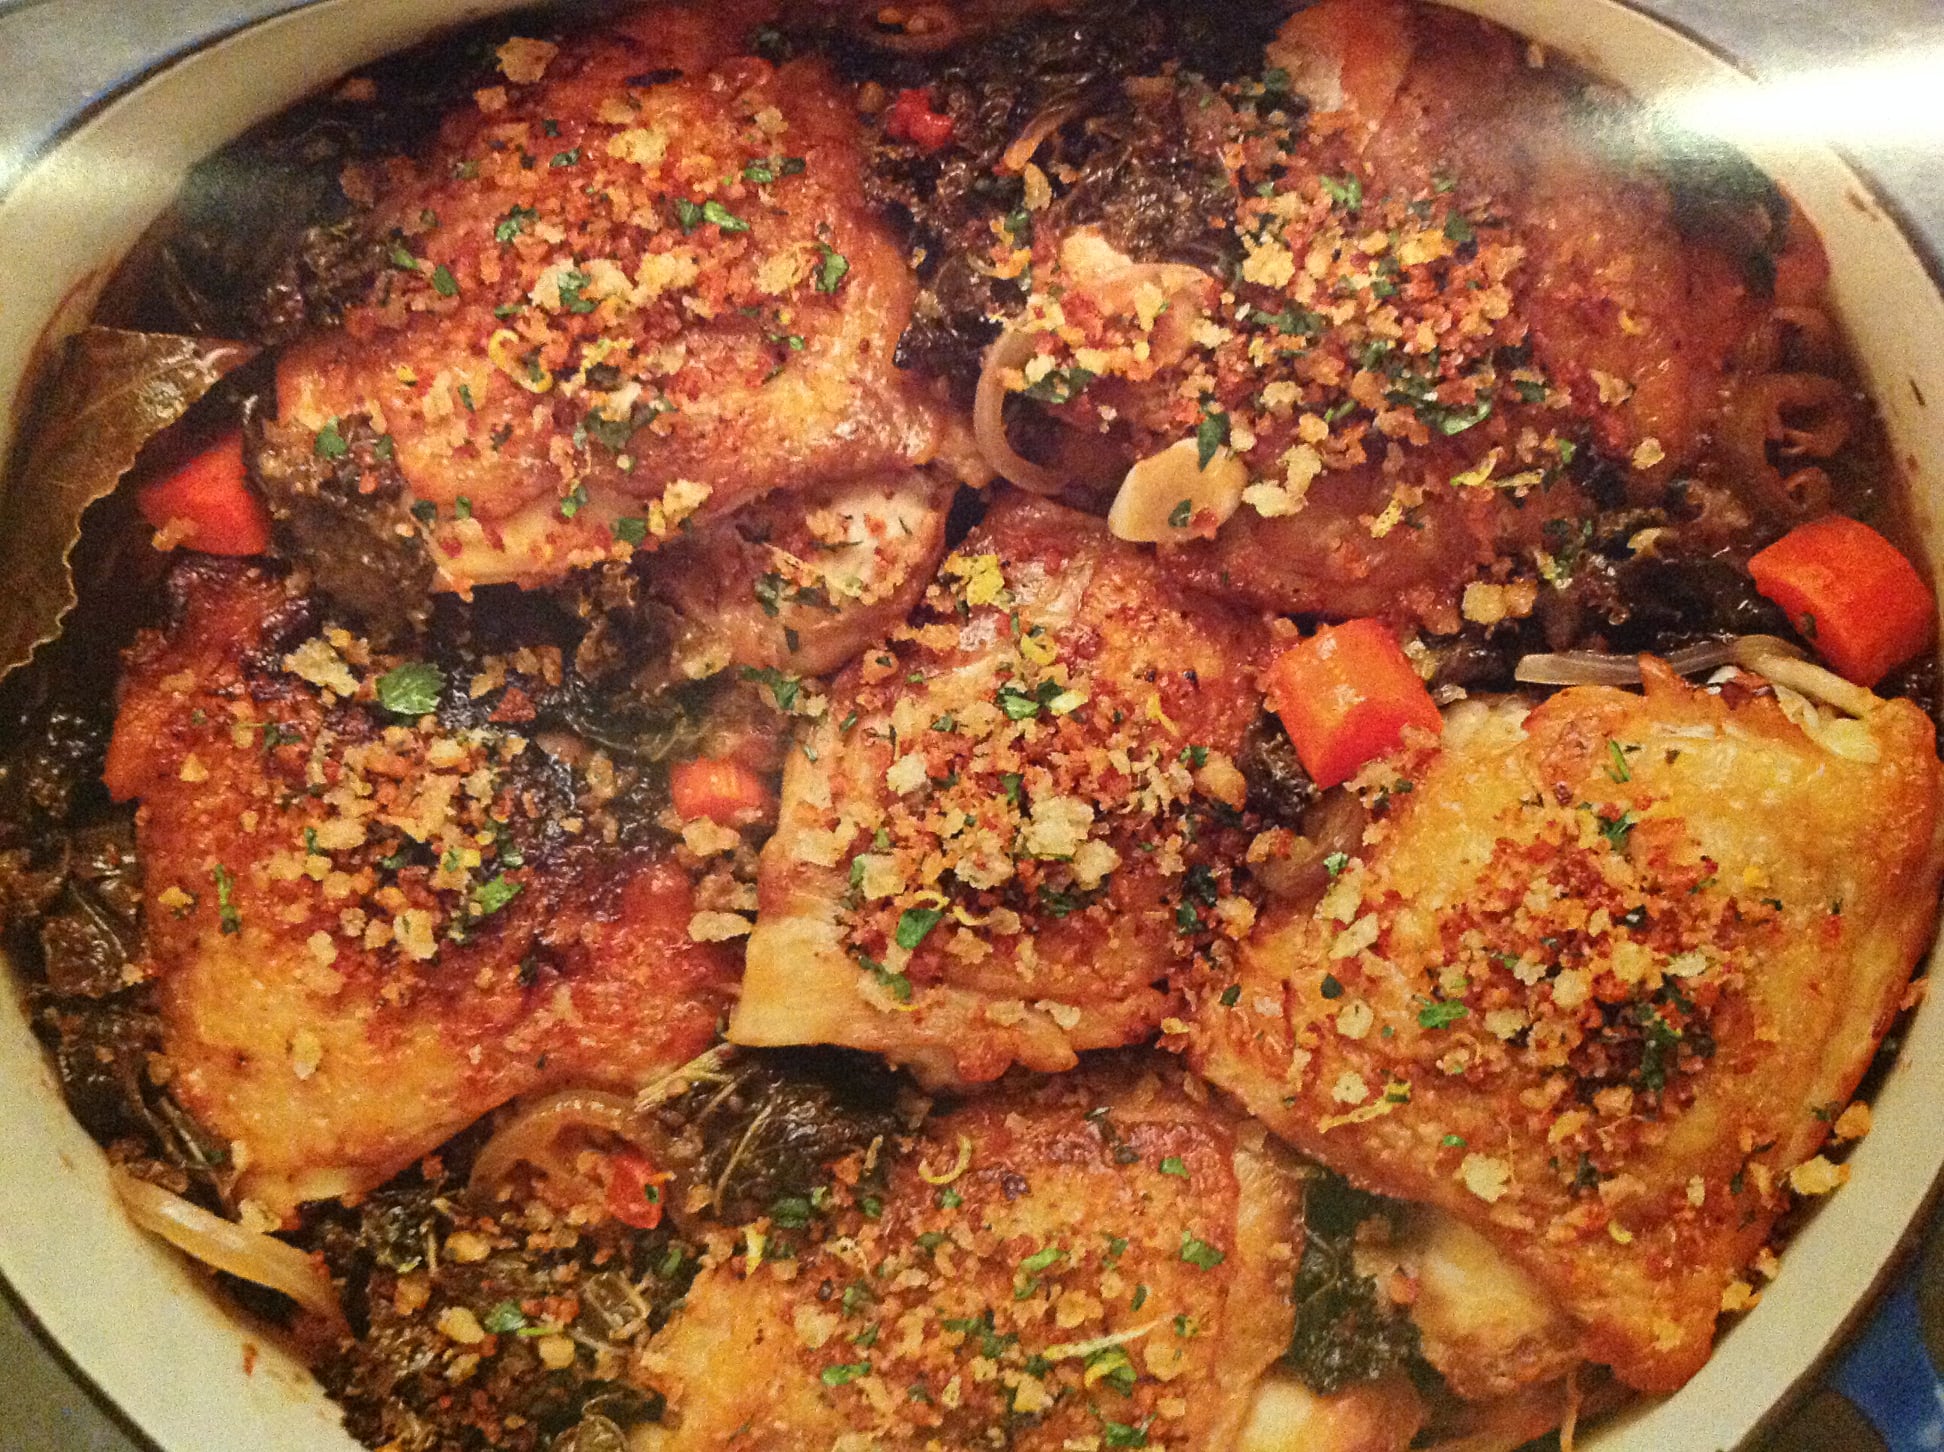 Spicy Kale with Braised Chicken Thighs